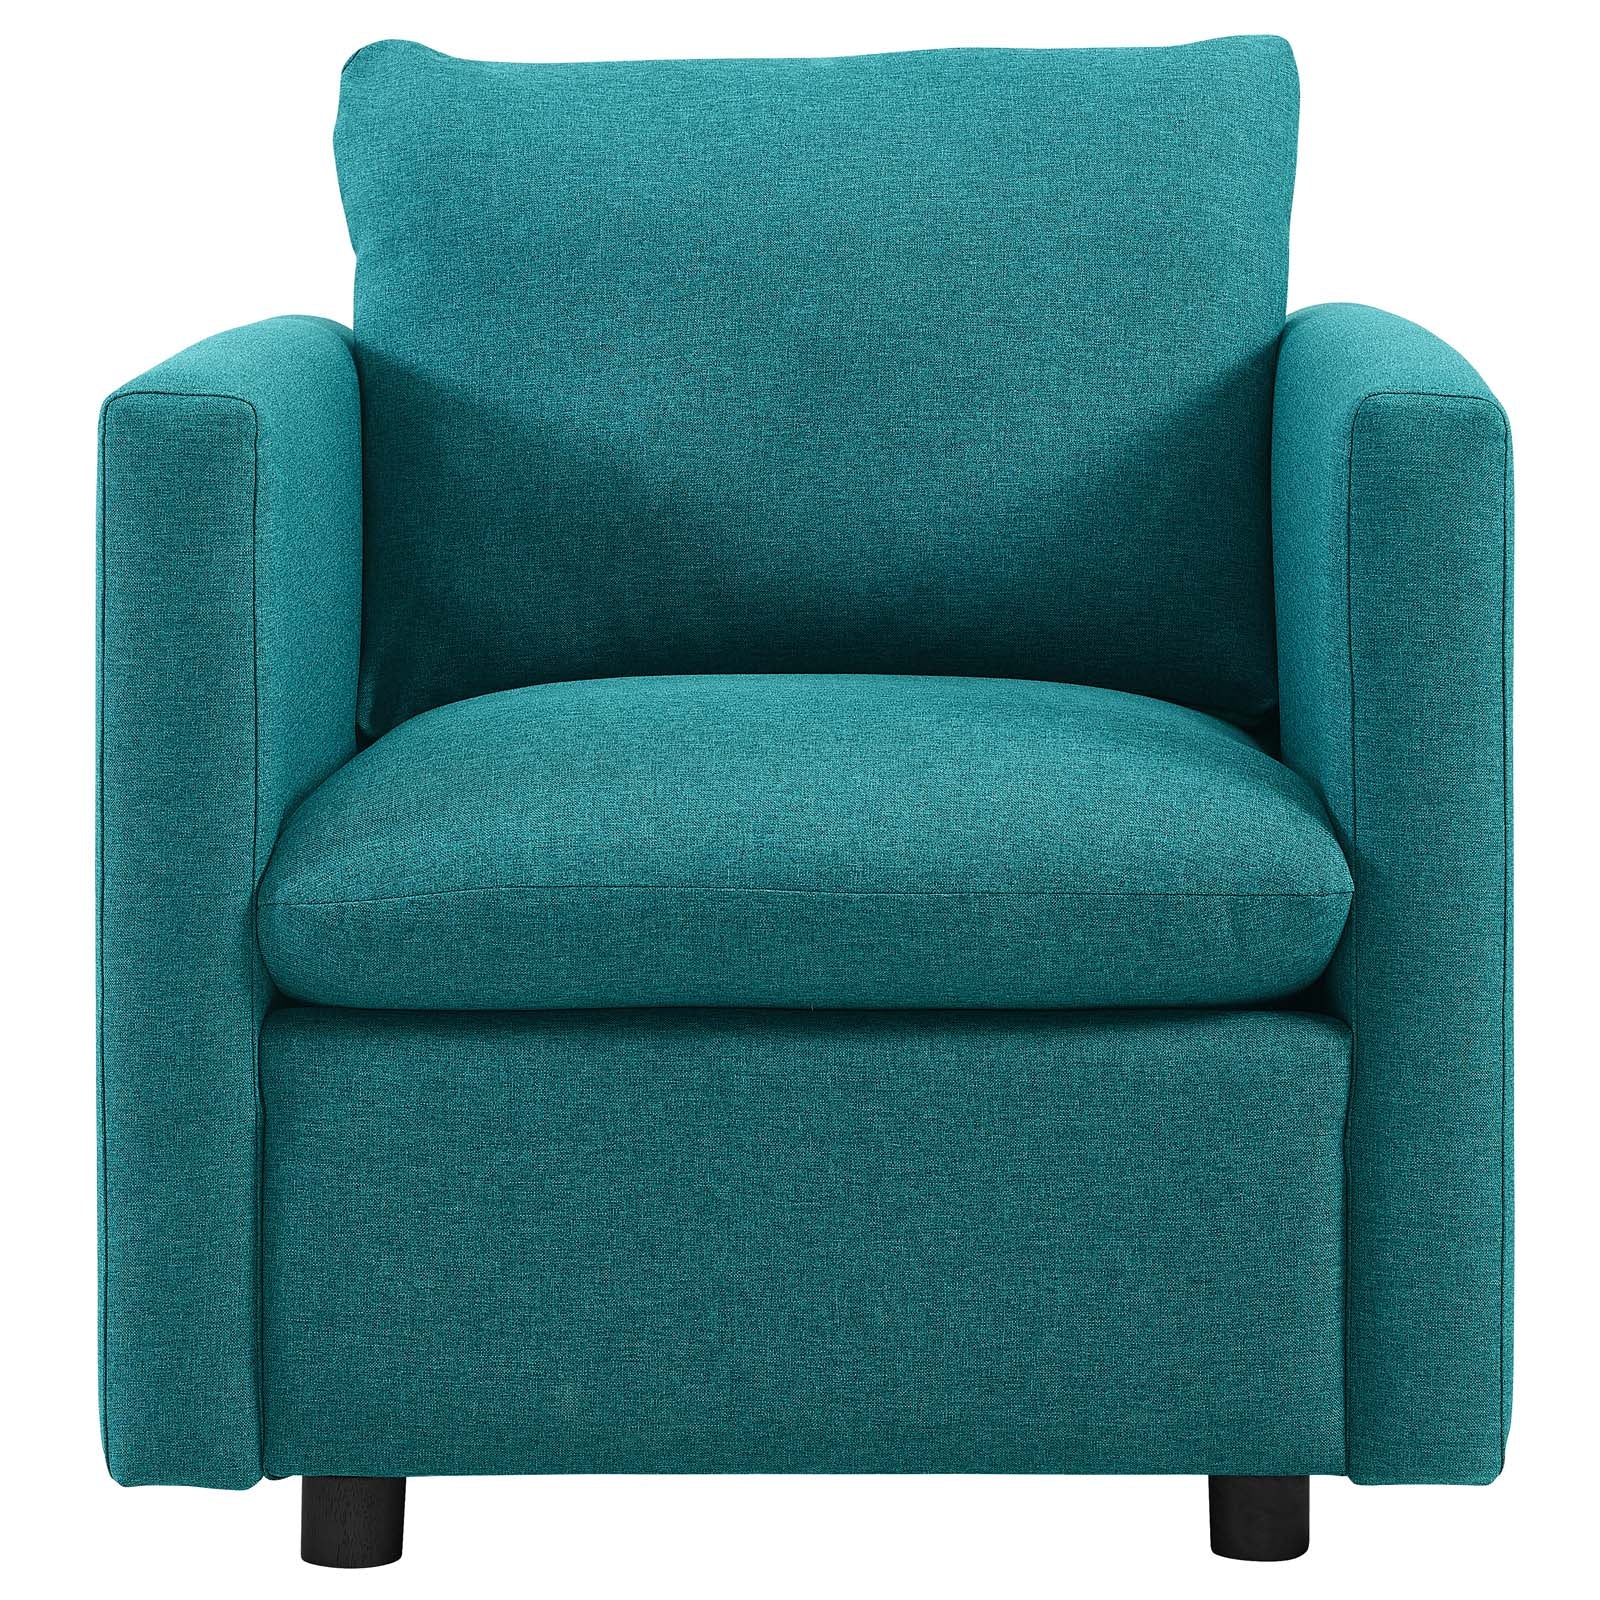 Modway Chairs - Activate Upholstered Fabric Armchair Teal